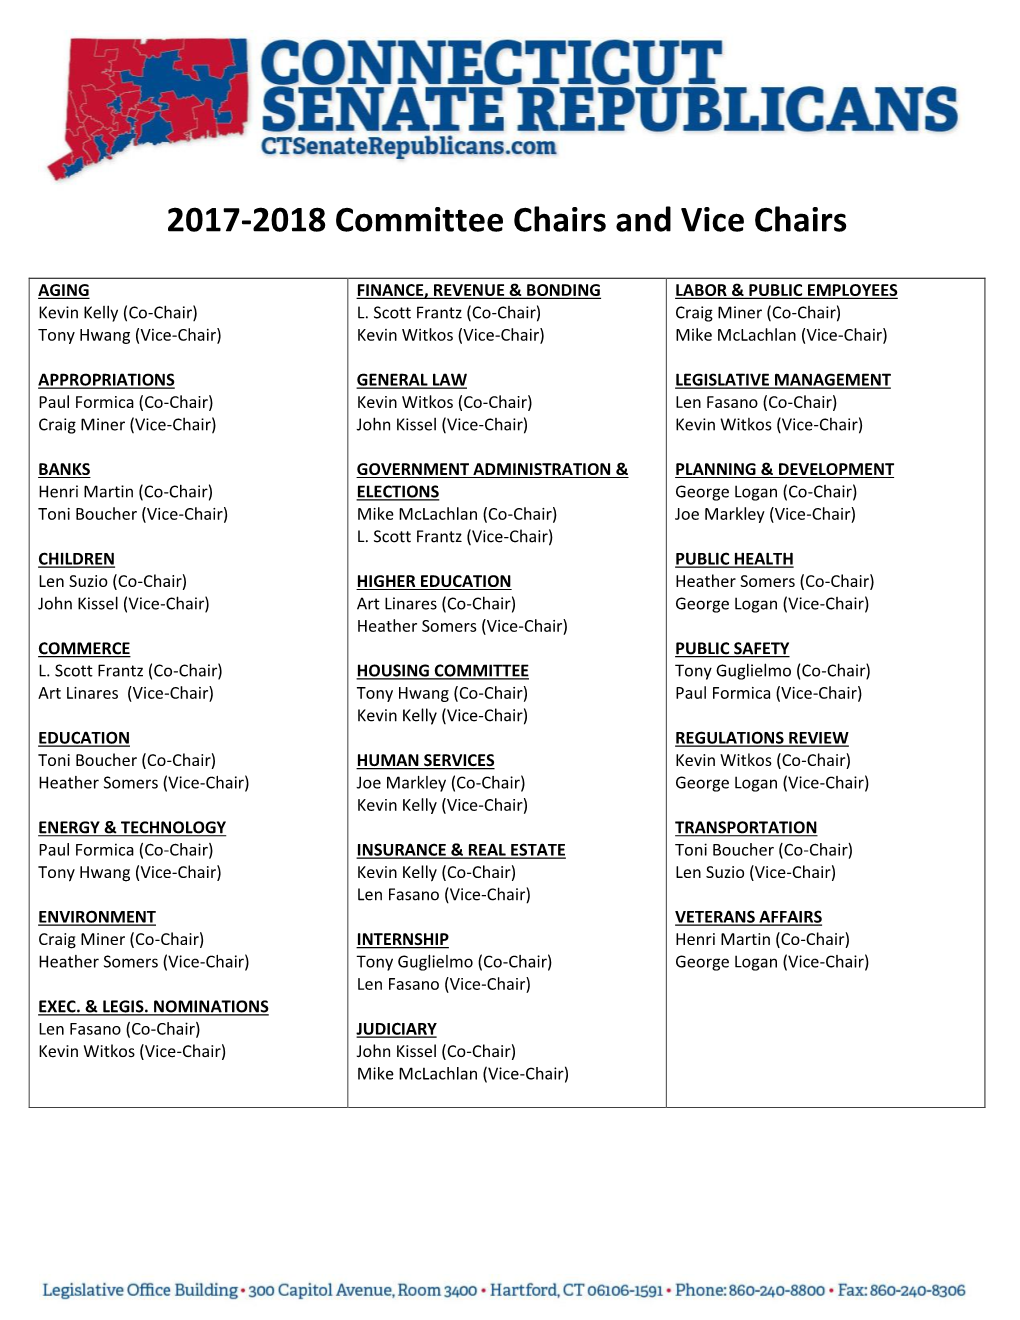 Senate Republicans Committee Chairs